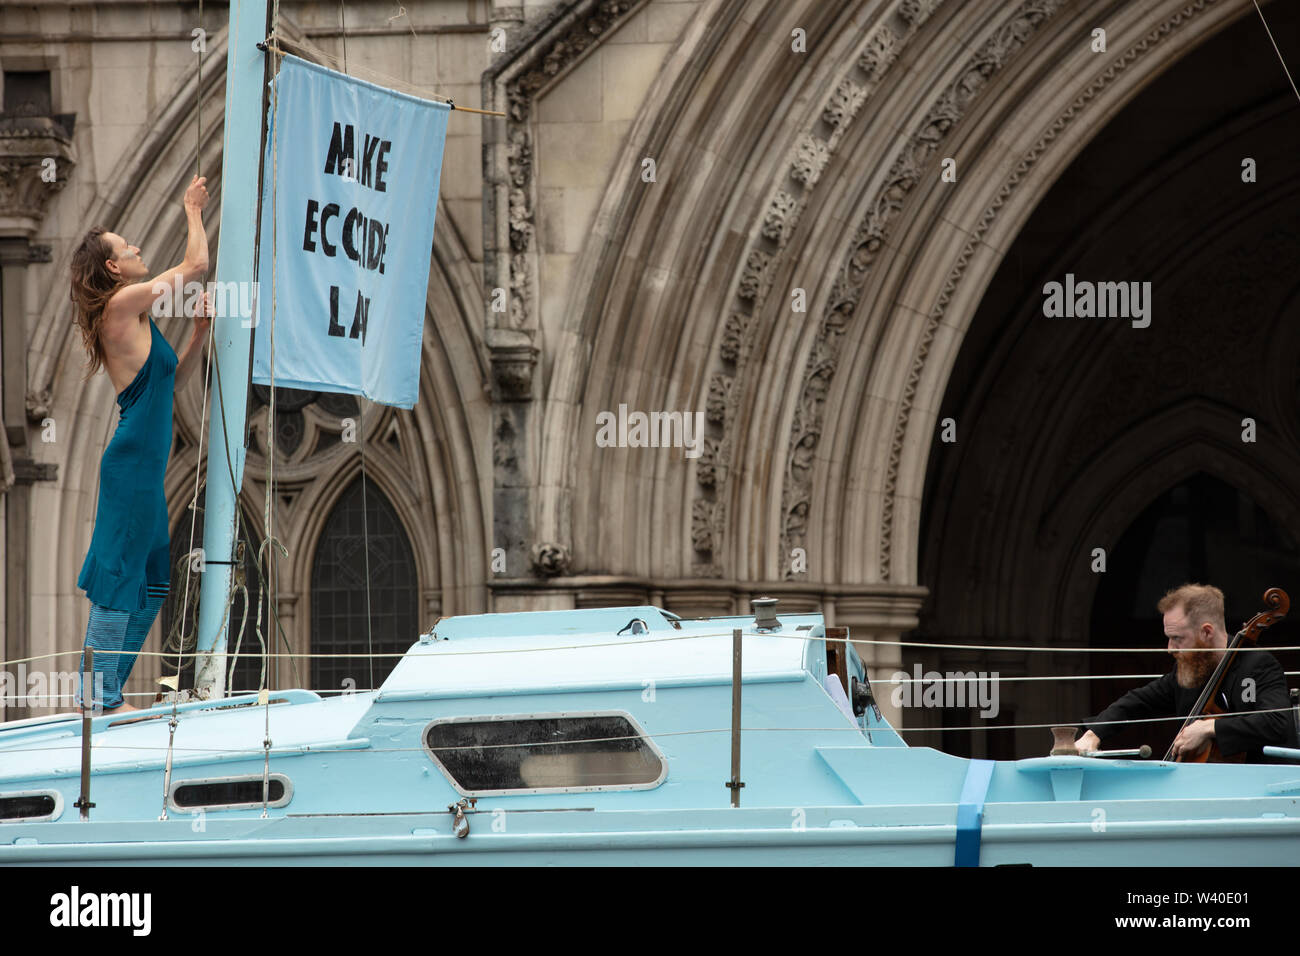 London, UK. 15th July 2019. Extinction Rebellion activist raising the 'make ecocide law' flag at the climate action group's protest in front of the Royal Courts of Law on the Strand, London. Credit: Joe Kuis / Alamy News Stock Photo